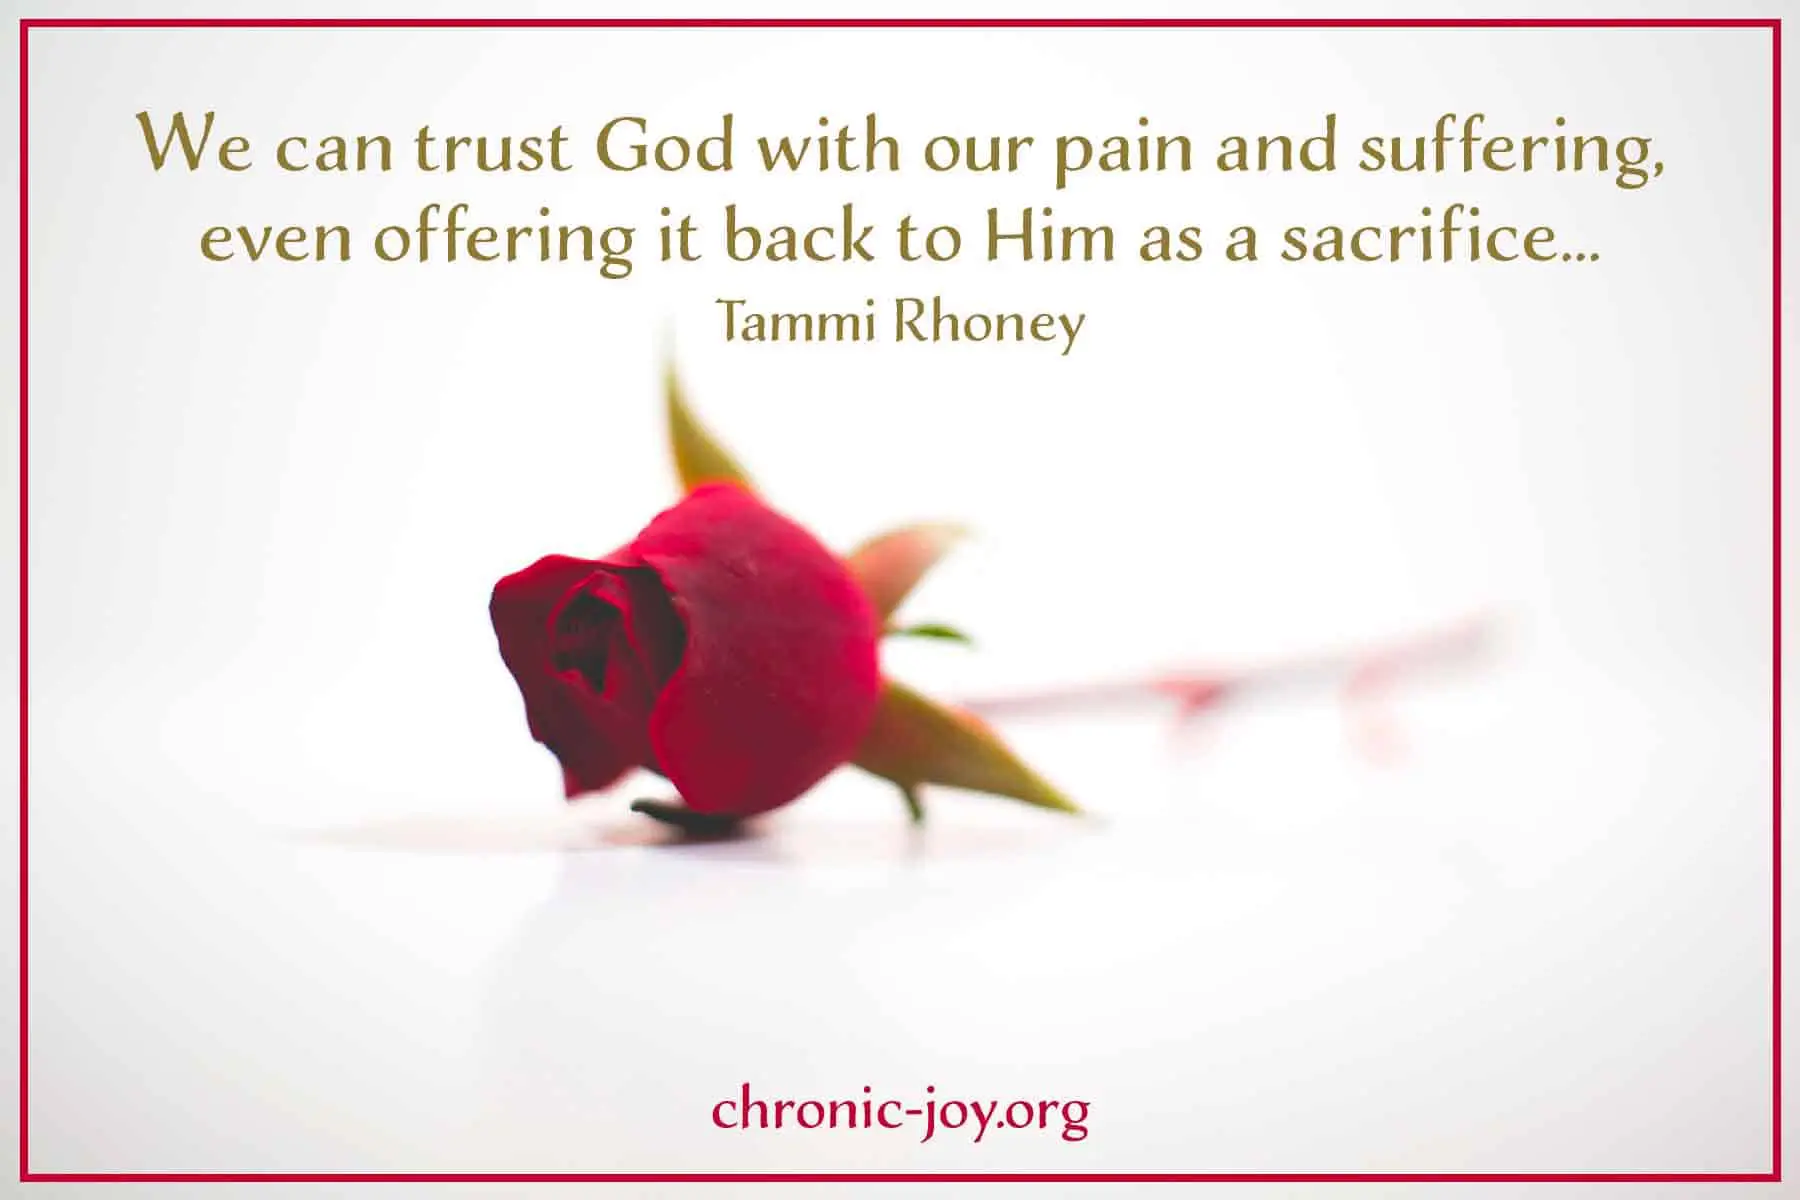 We can trust God with our pain and suffering...